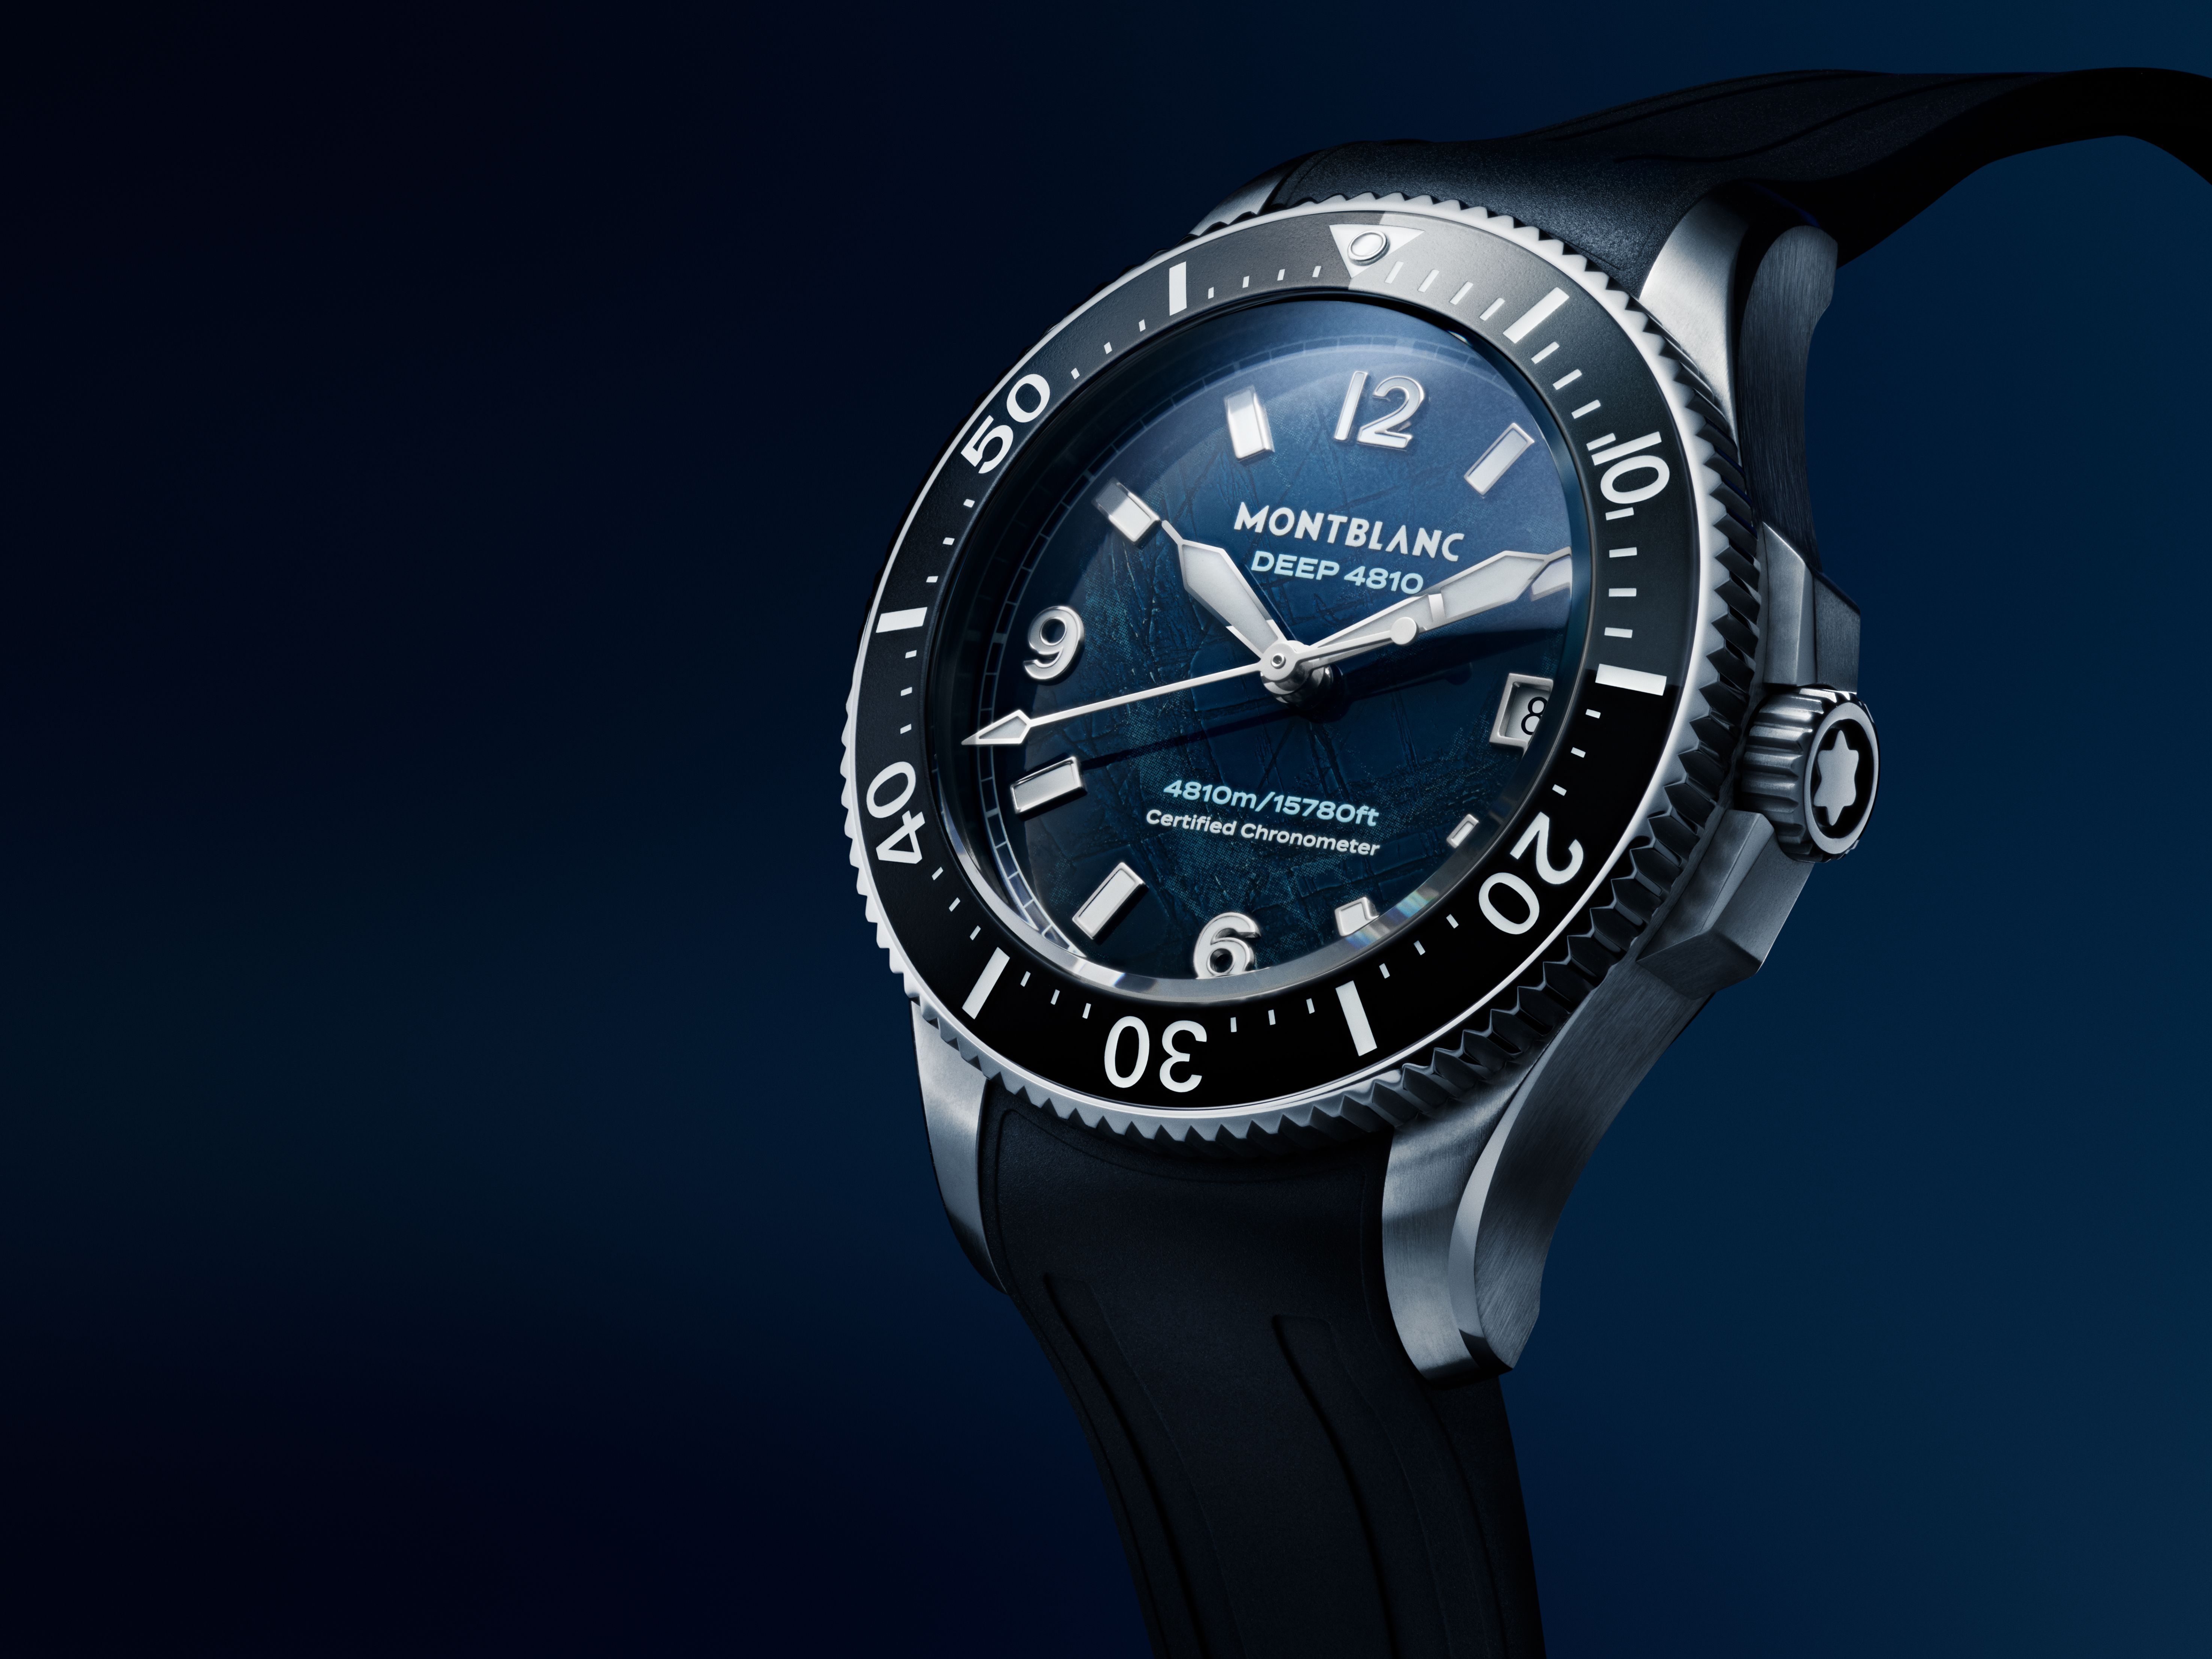 The watch features a water resistance of 4810 meters